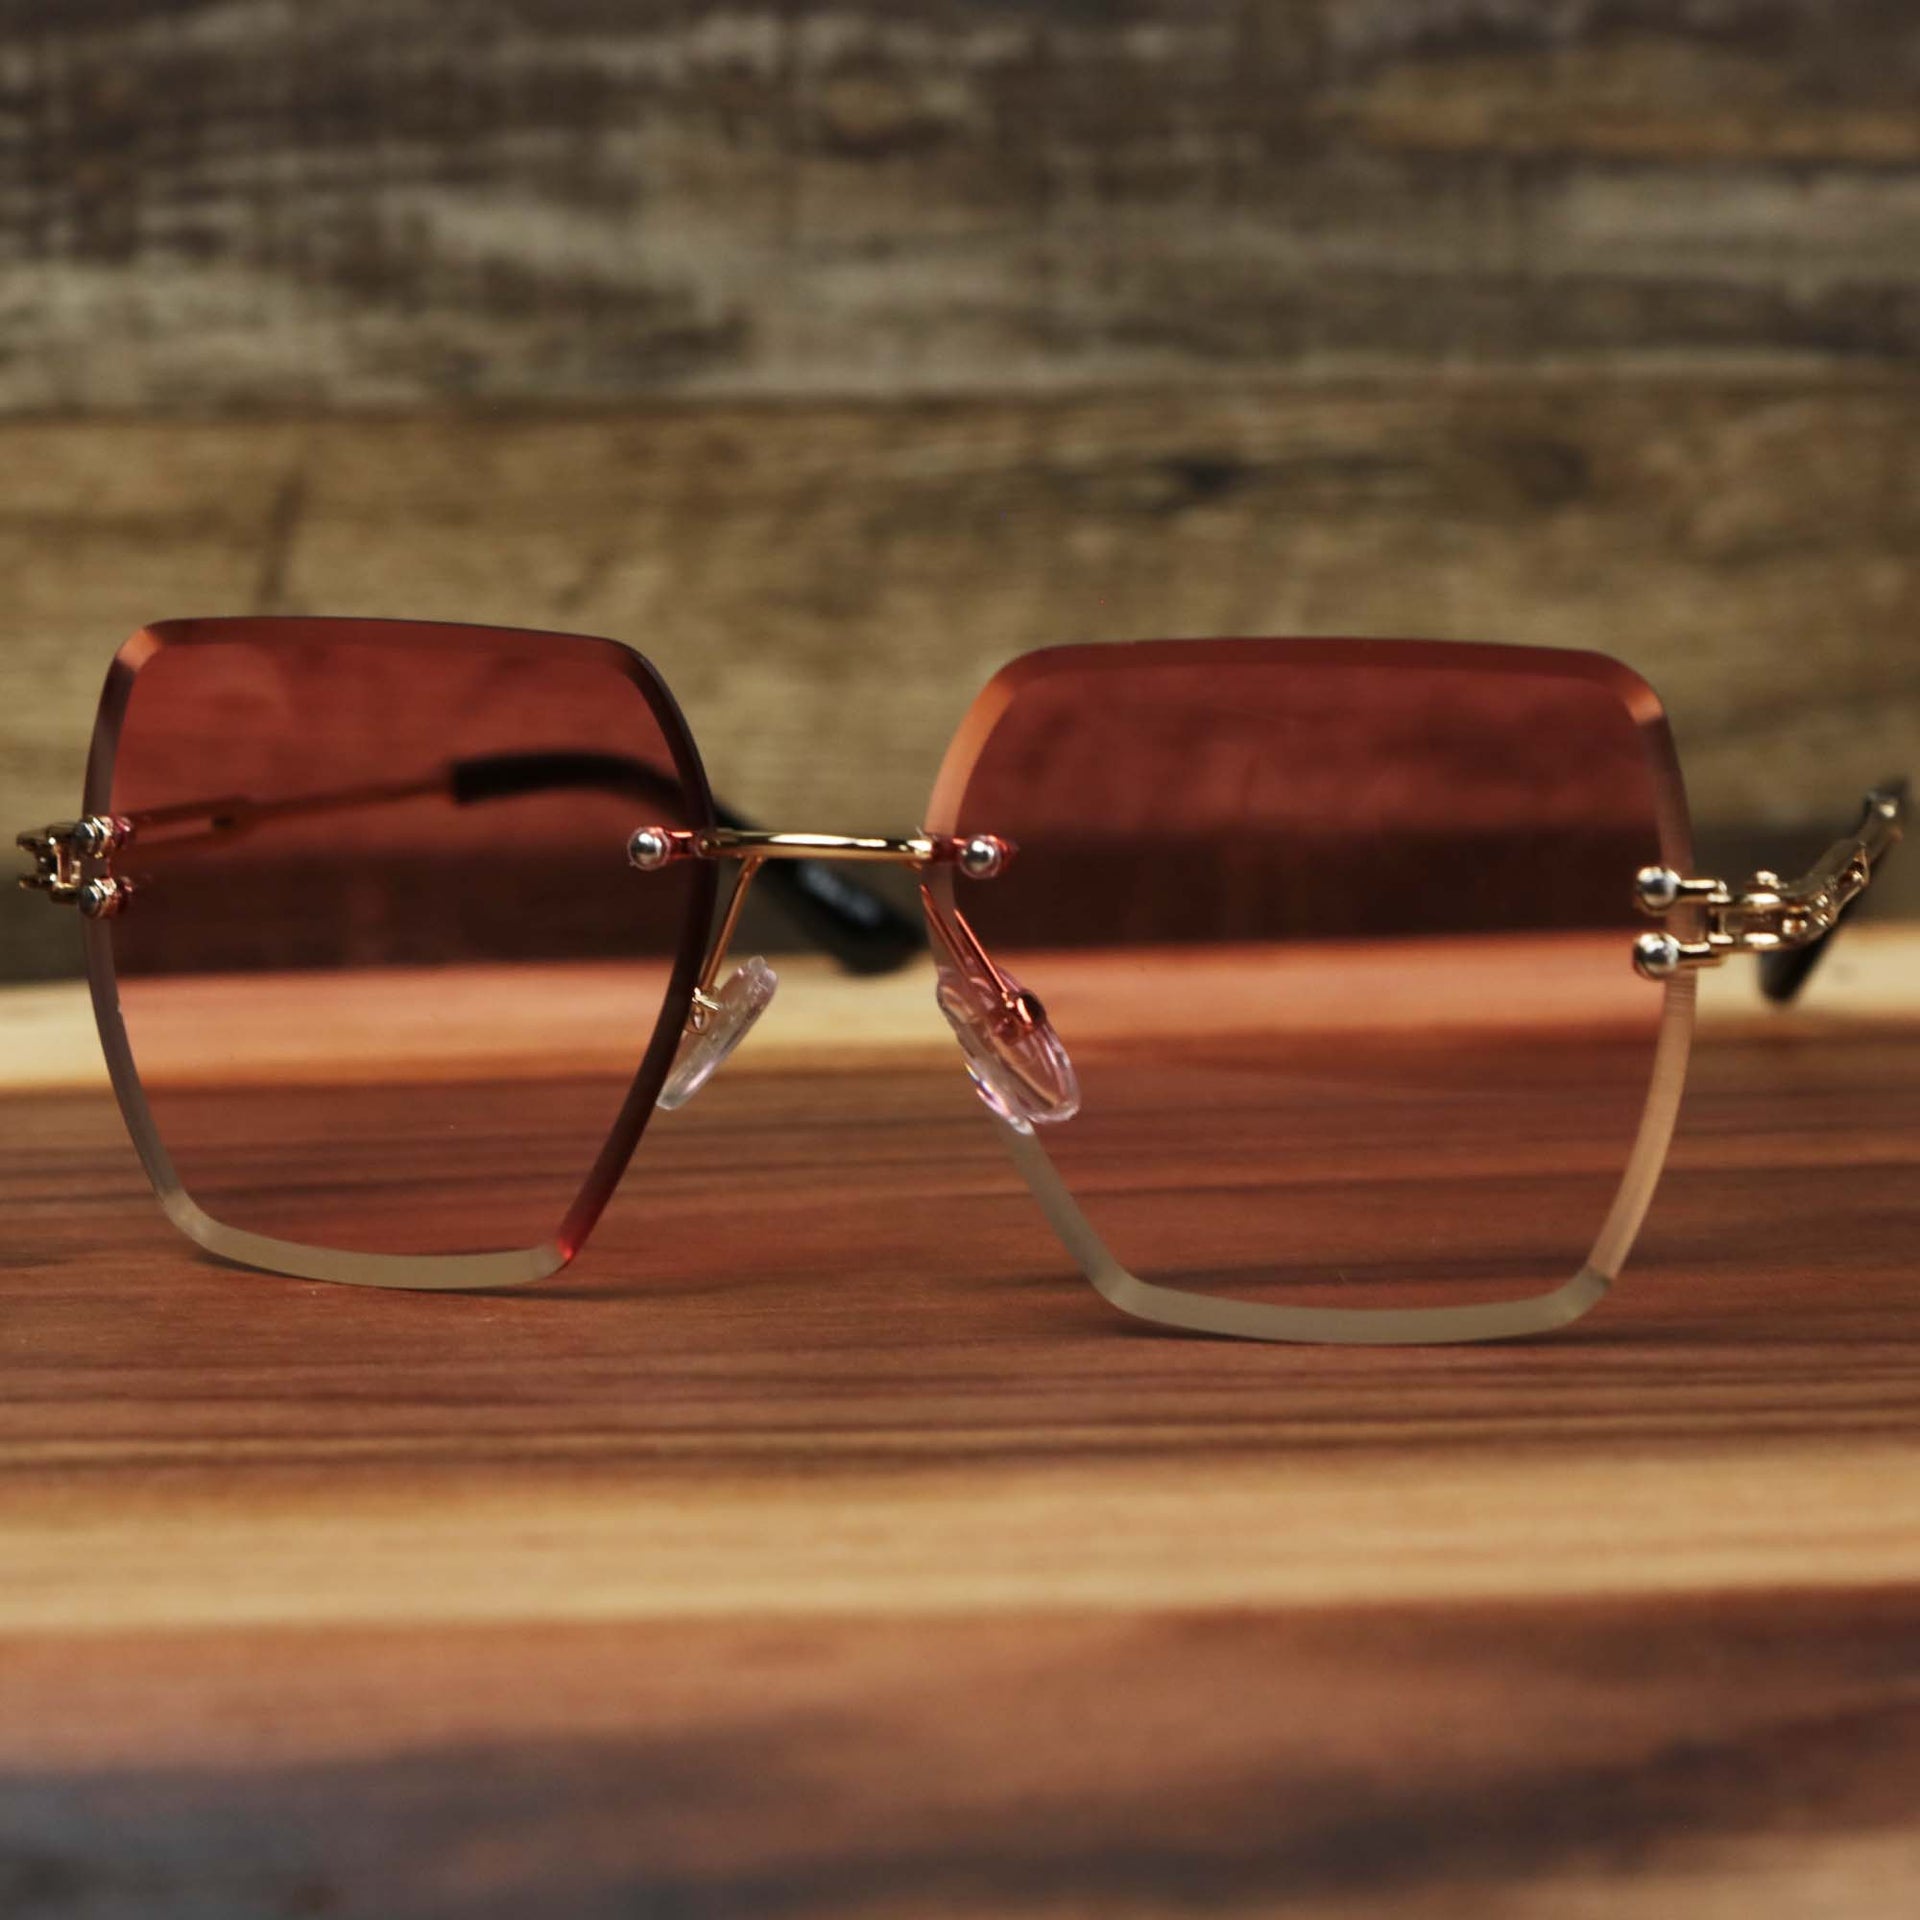 The Large Lightweight Frame Pink Lens Sunglasses with Rose Gold Frame